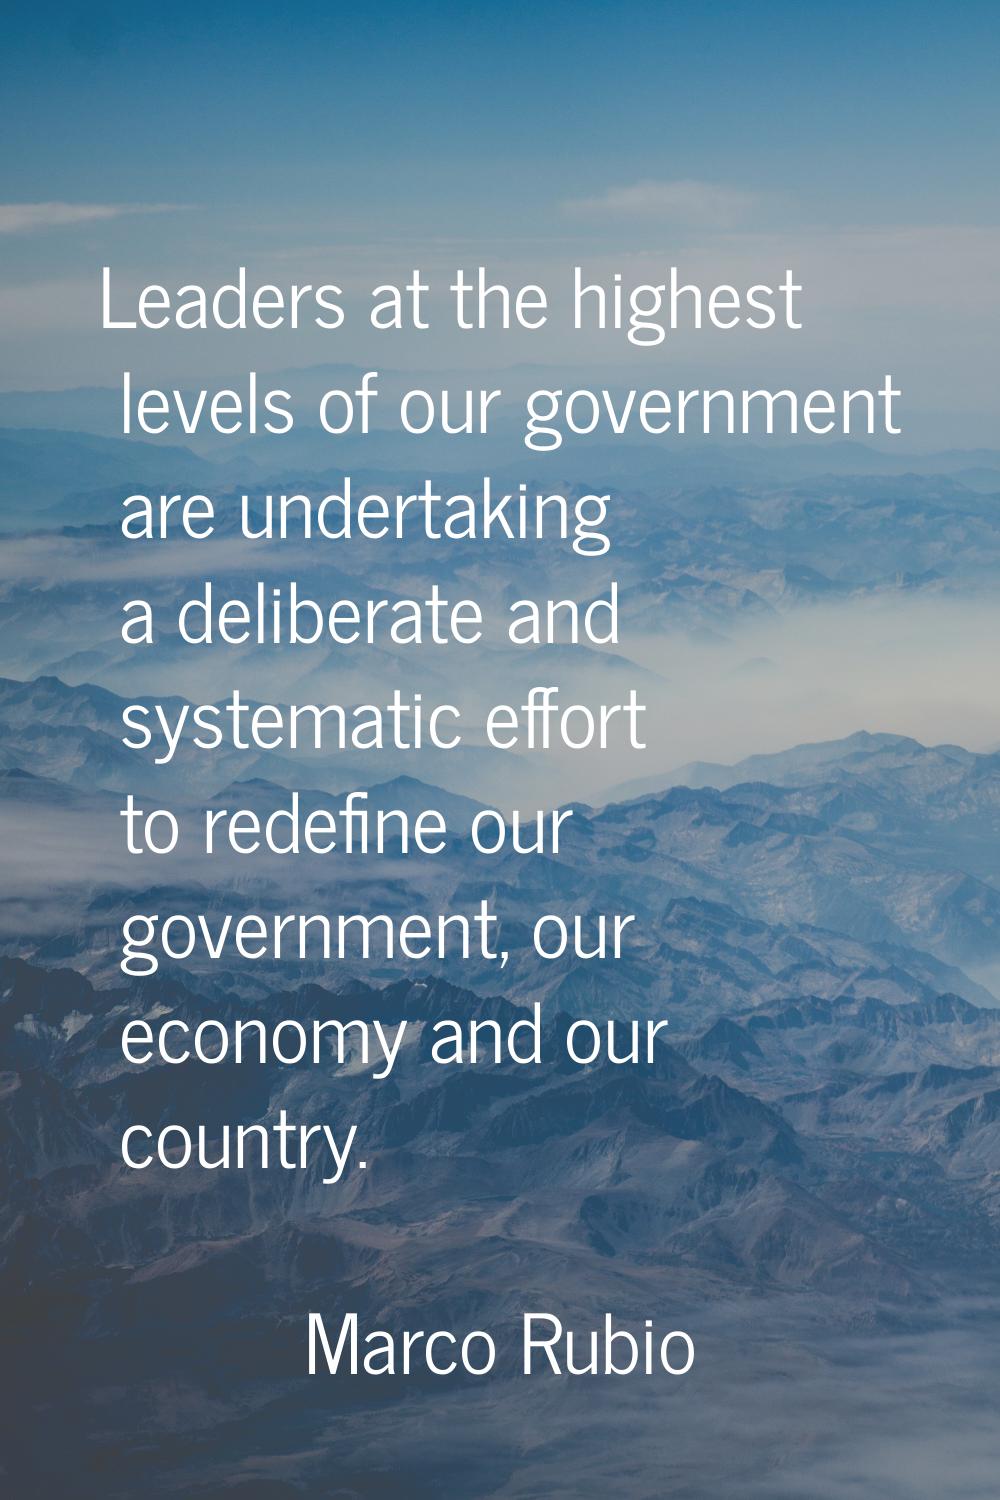 Leaders at the highest levels of our government are undertaking a deliberate and systematic effort 